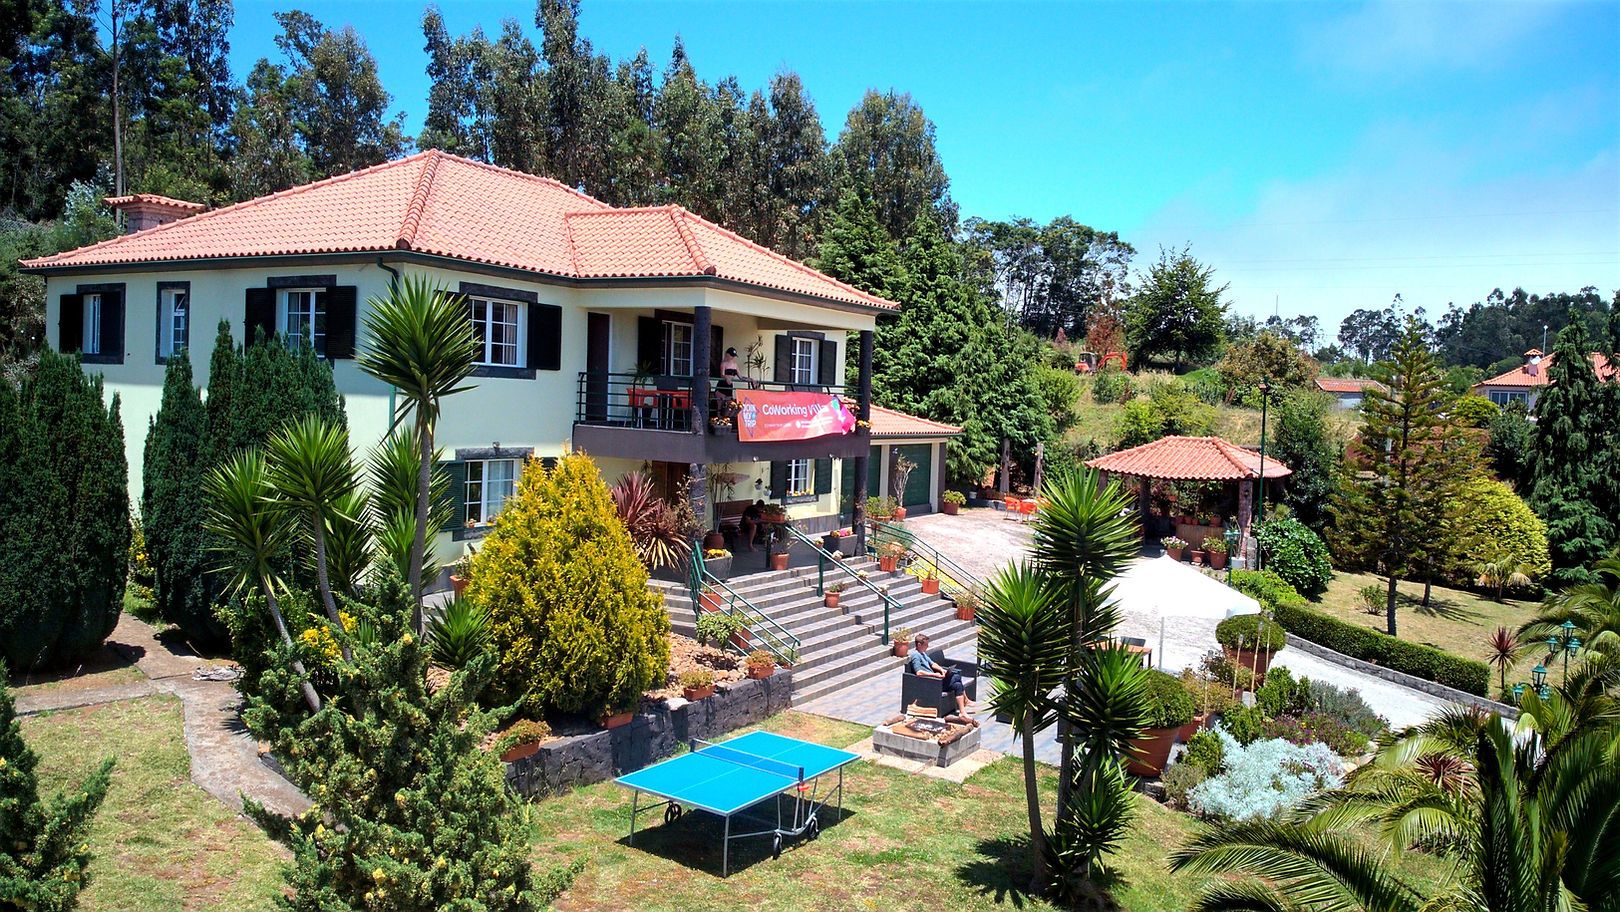 HomeOffice Madeira residential style palatial villa with lawn, stairs, main building and outdoor gazebo